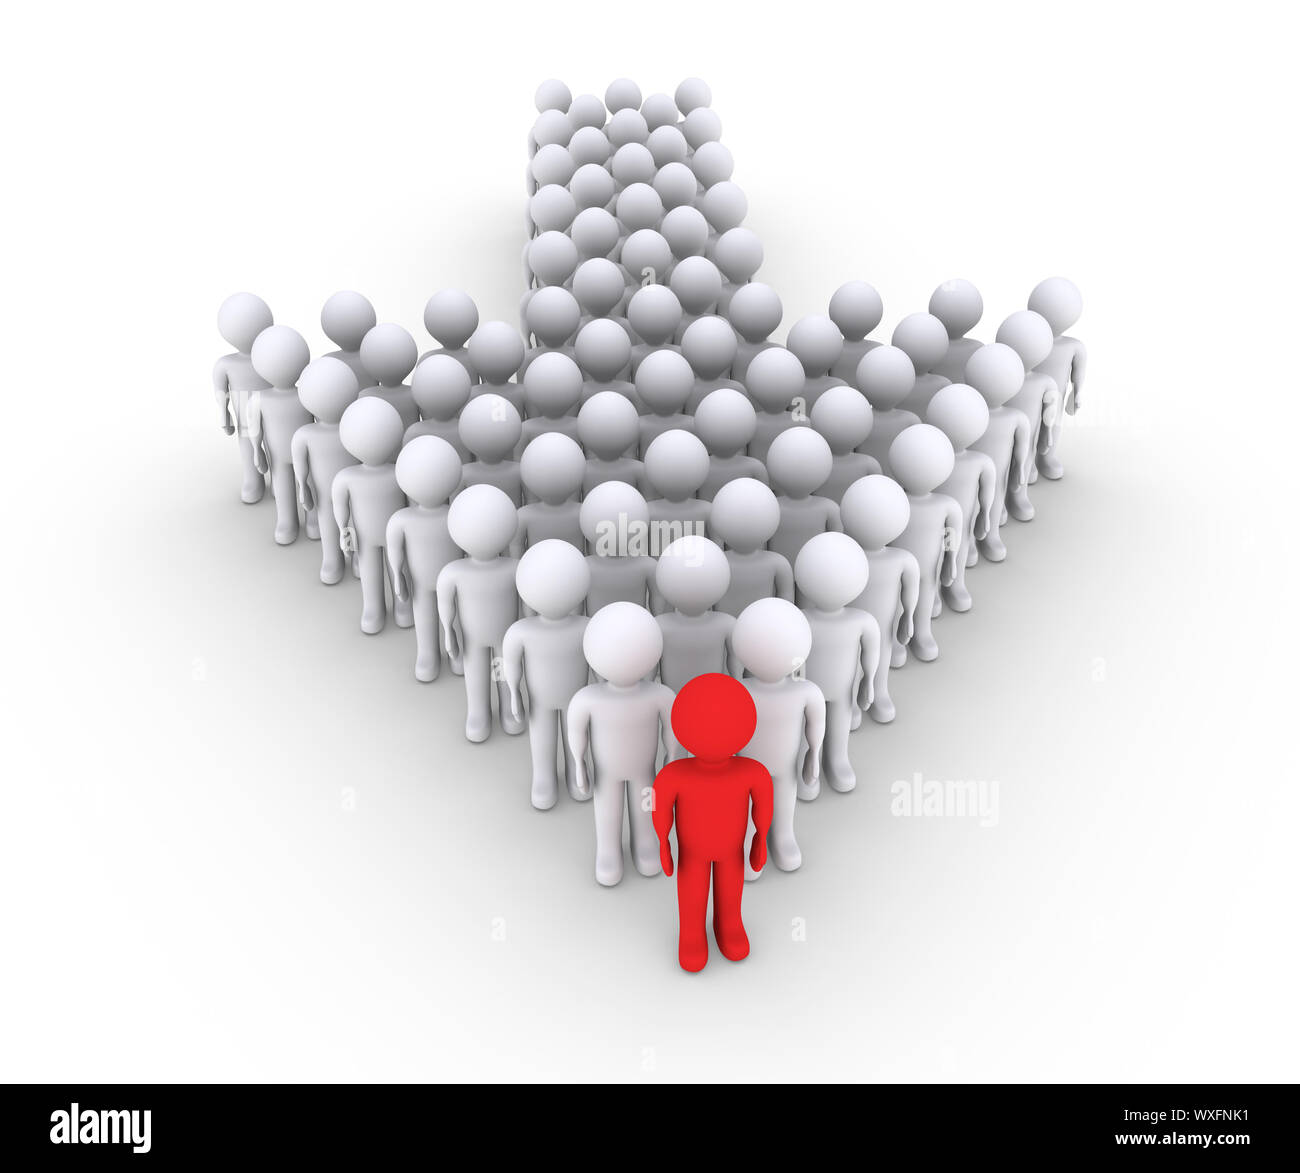 Many 3d people form an arrow with the leader in front Stock Photo